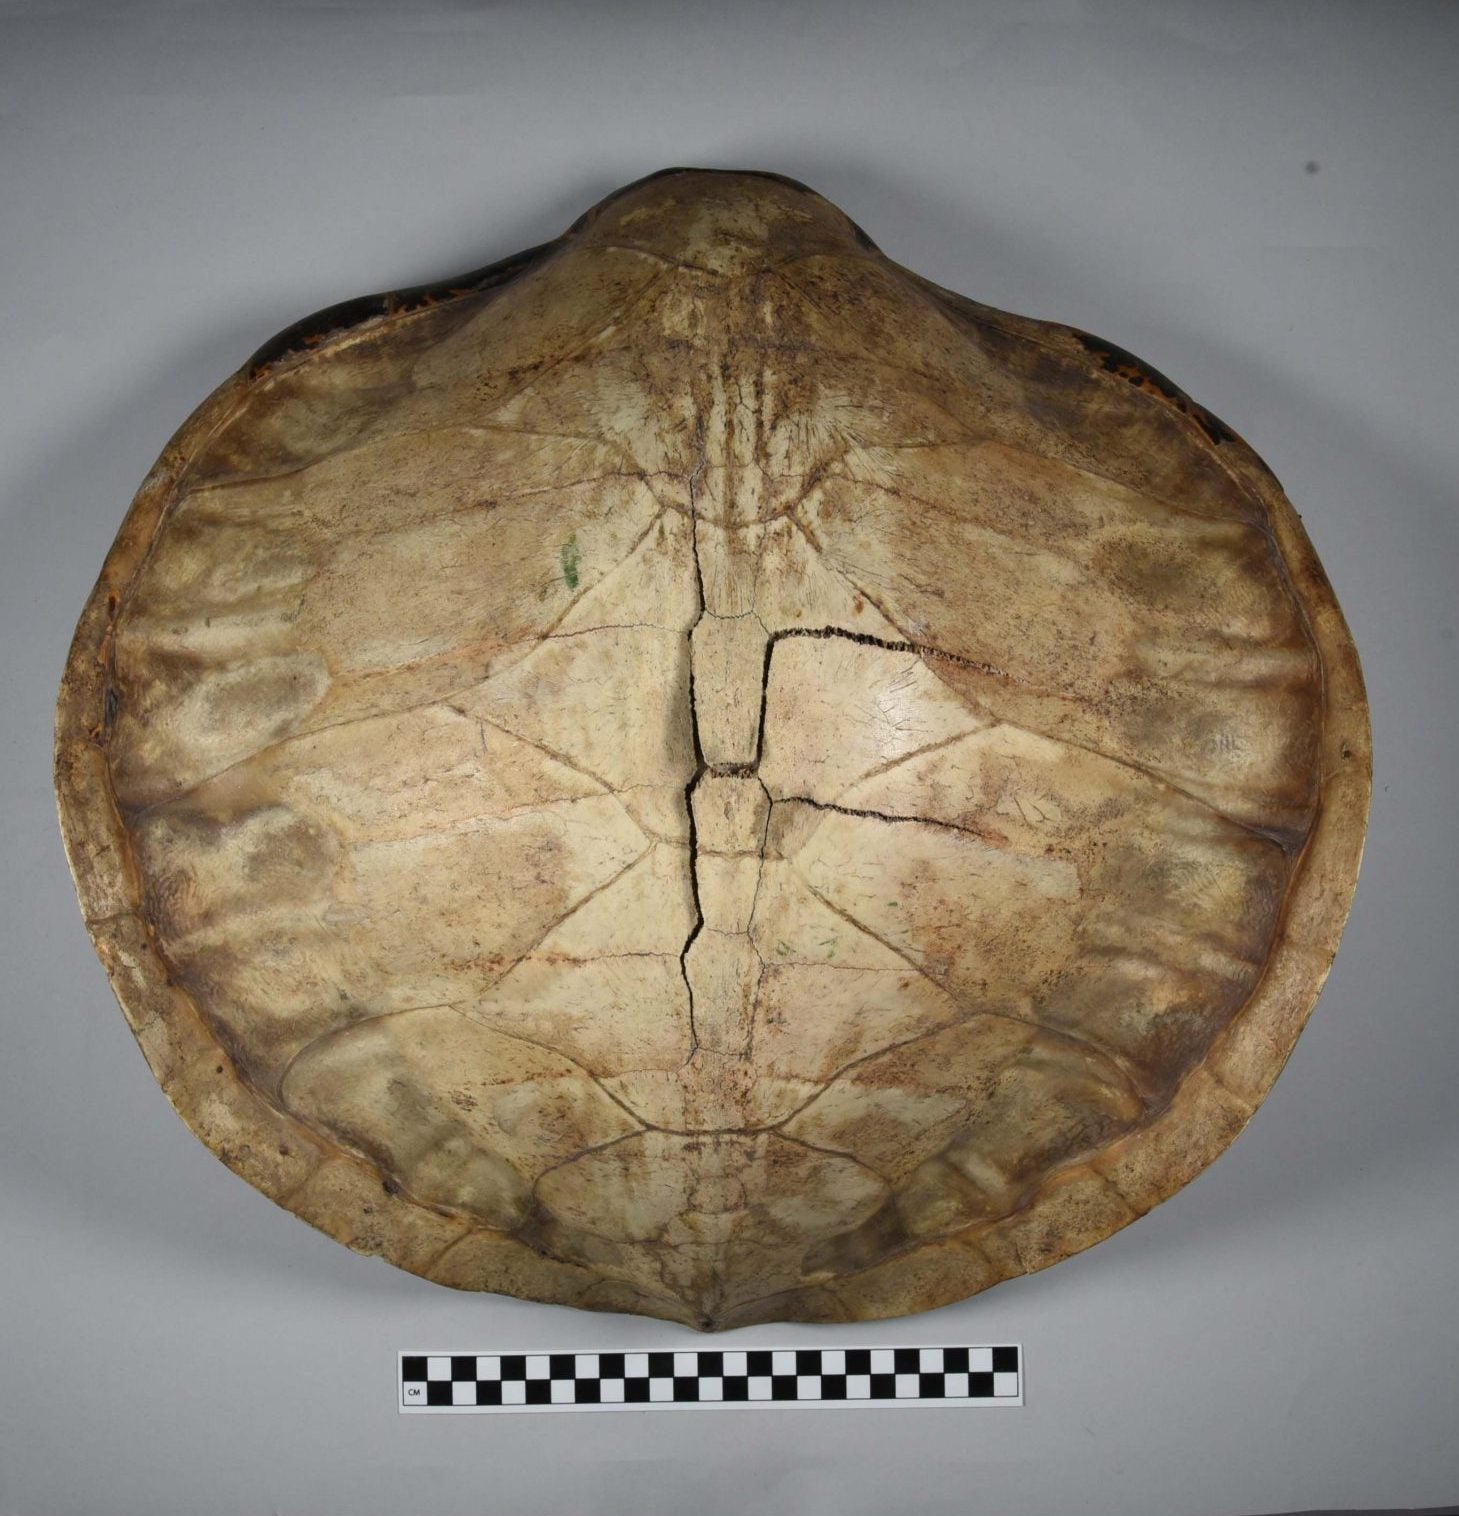 The top side of the turtle shell salakot. It shows several cracks in the middle of a large turtle shell.